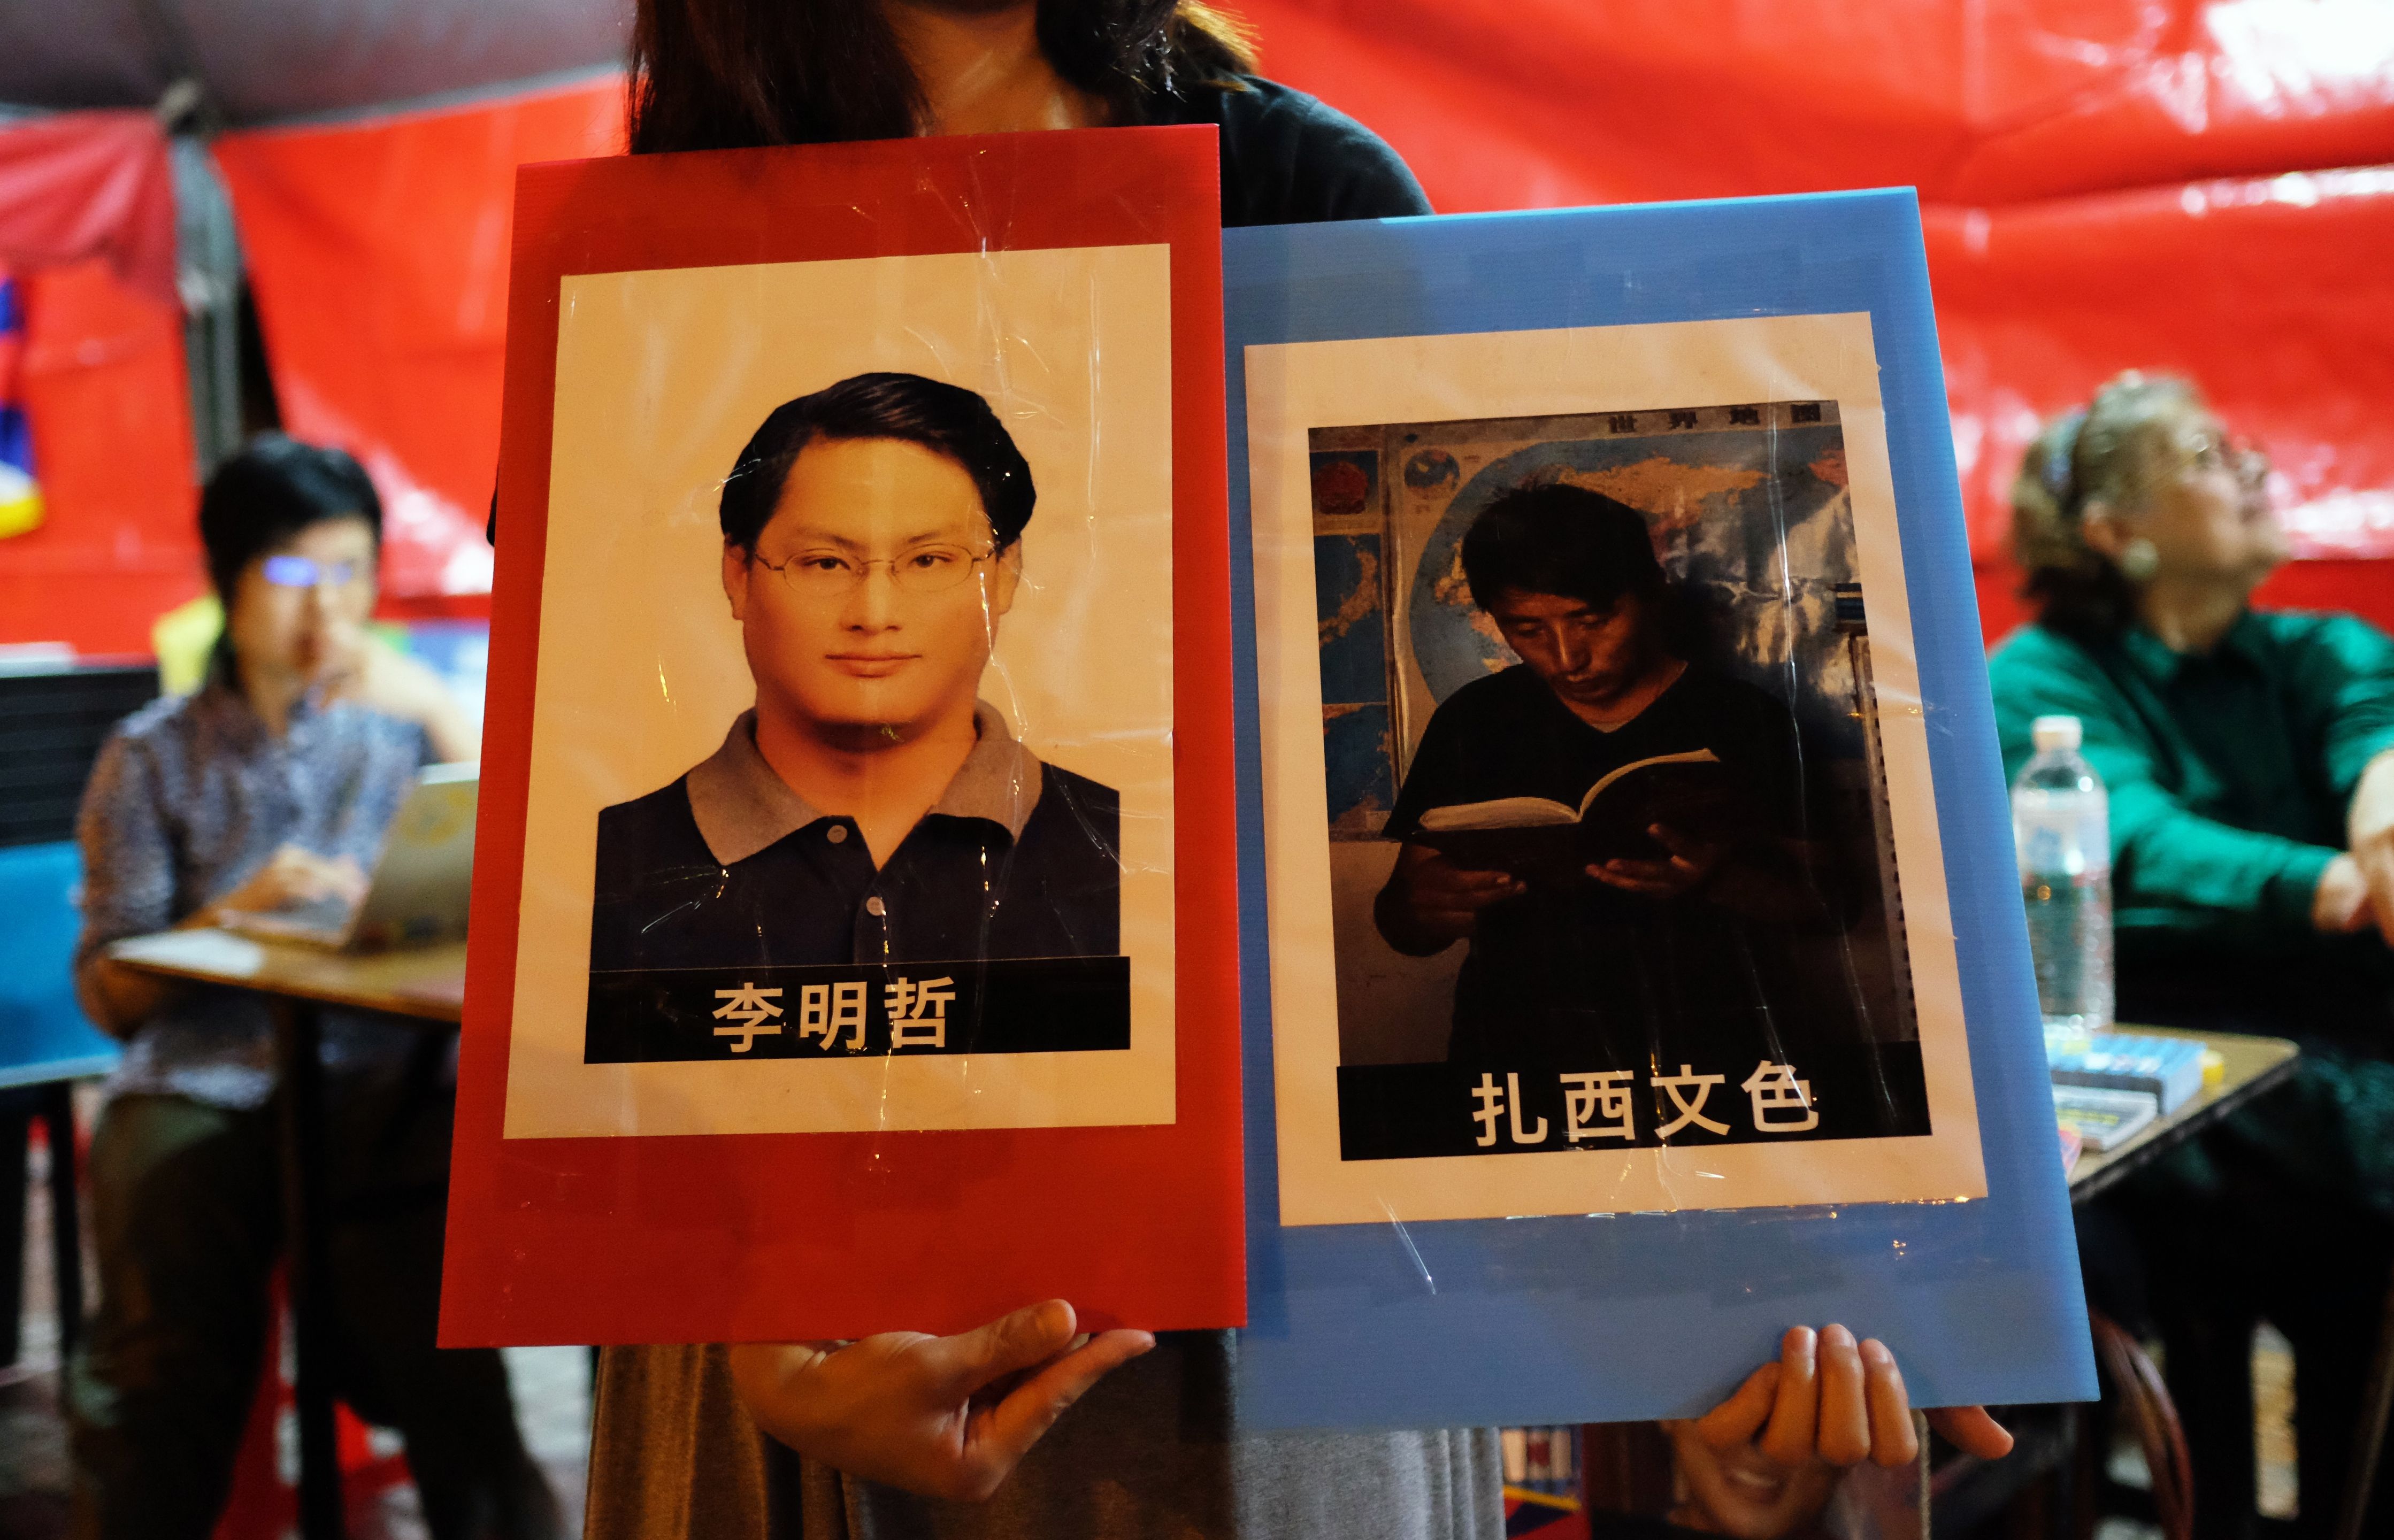 A volunteer holds placards of detained Tibetan activist Tashi Wangchuk and Taiwanese activist Lee Ming-cheh in Taipei, Taiwan on June 4, 2017. (Sam Yeh—AFP/Getty Images)